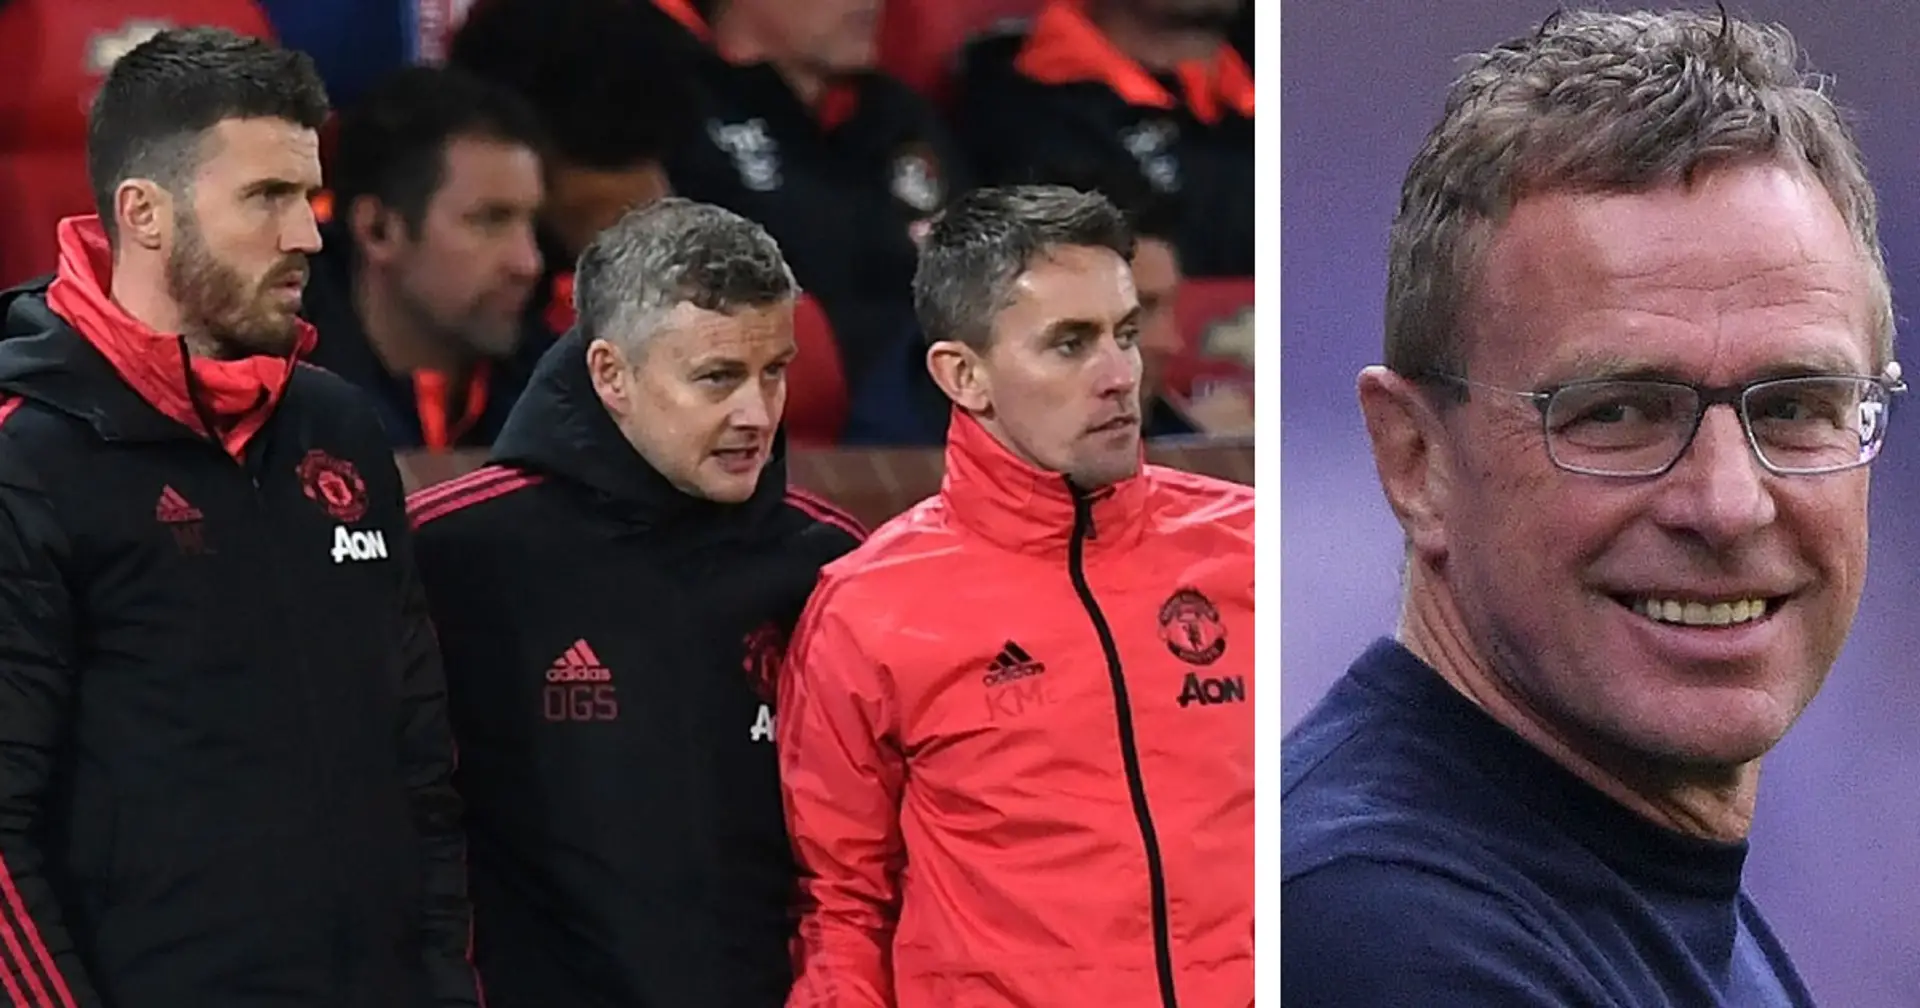 'A confused club with no clear structure': Man United slammed for 6 poor decisions - including Rangnick appointment